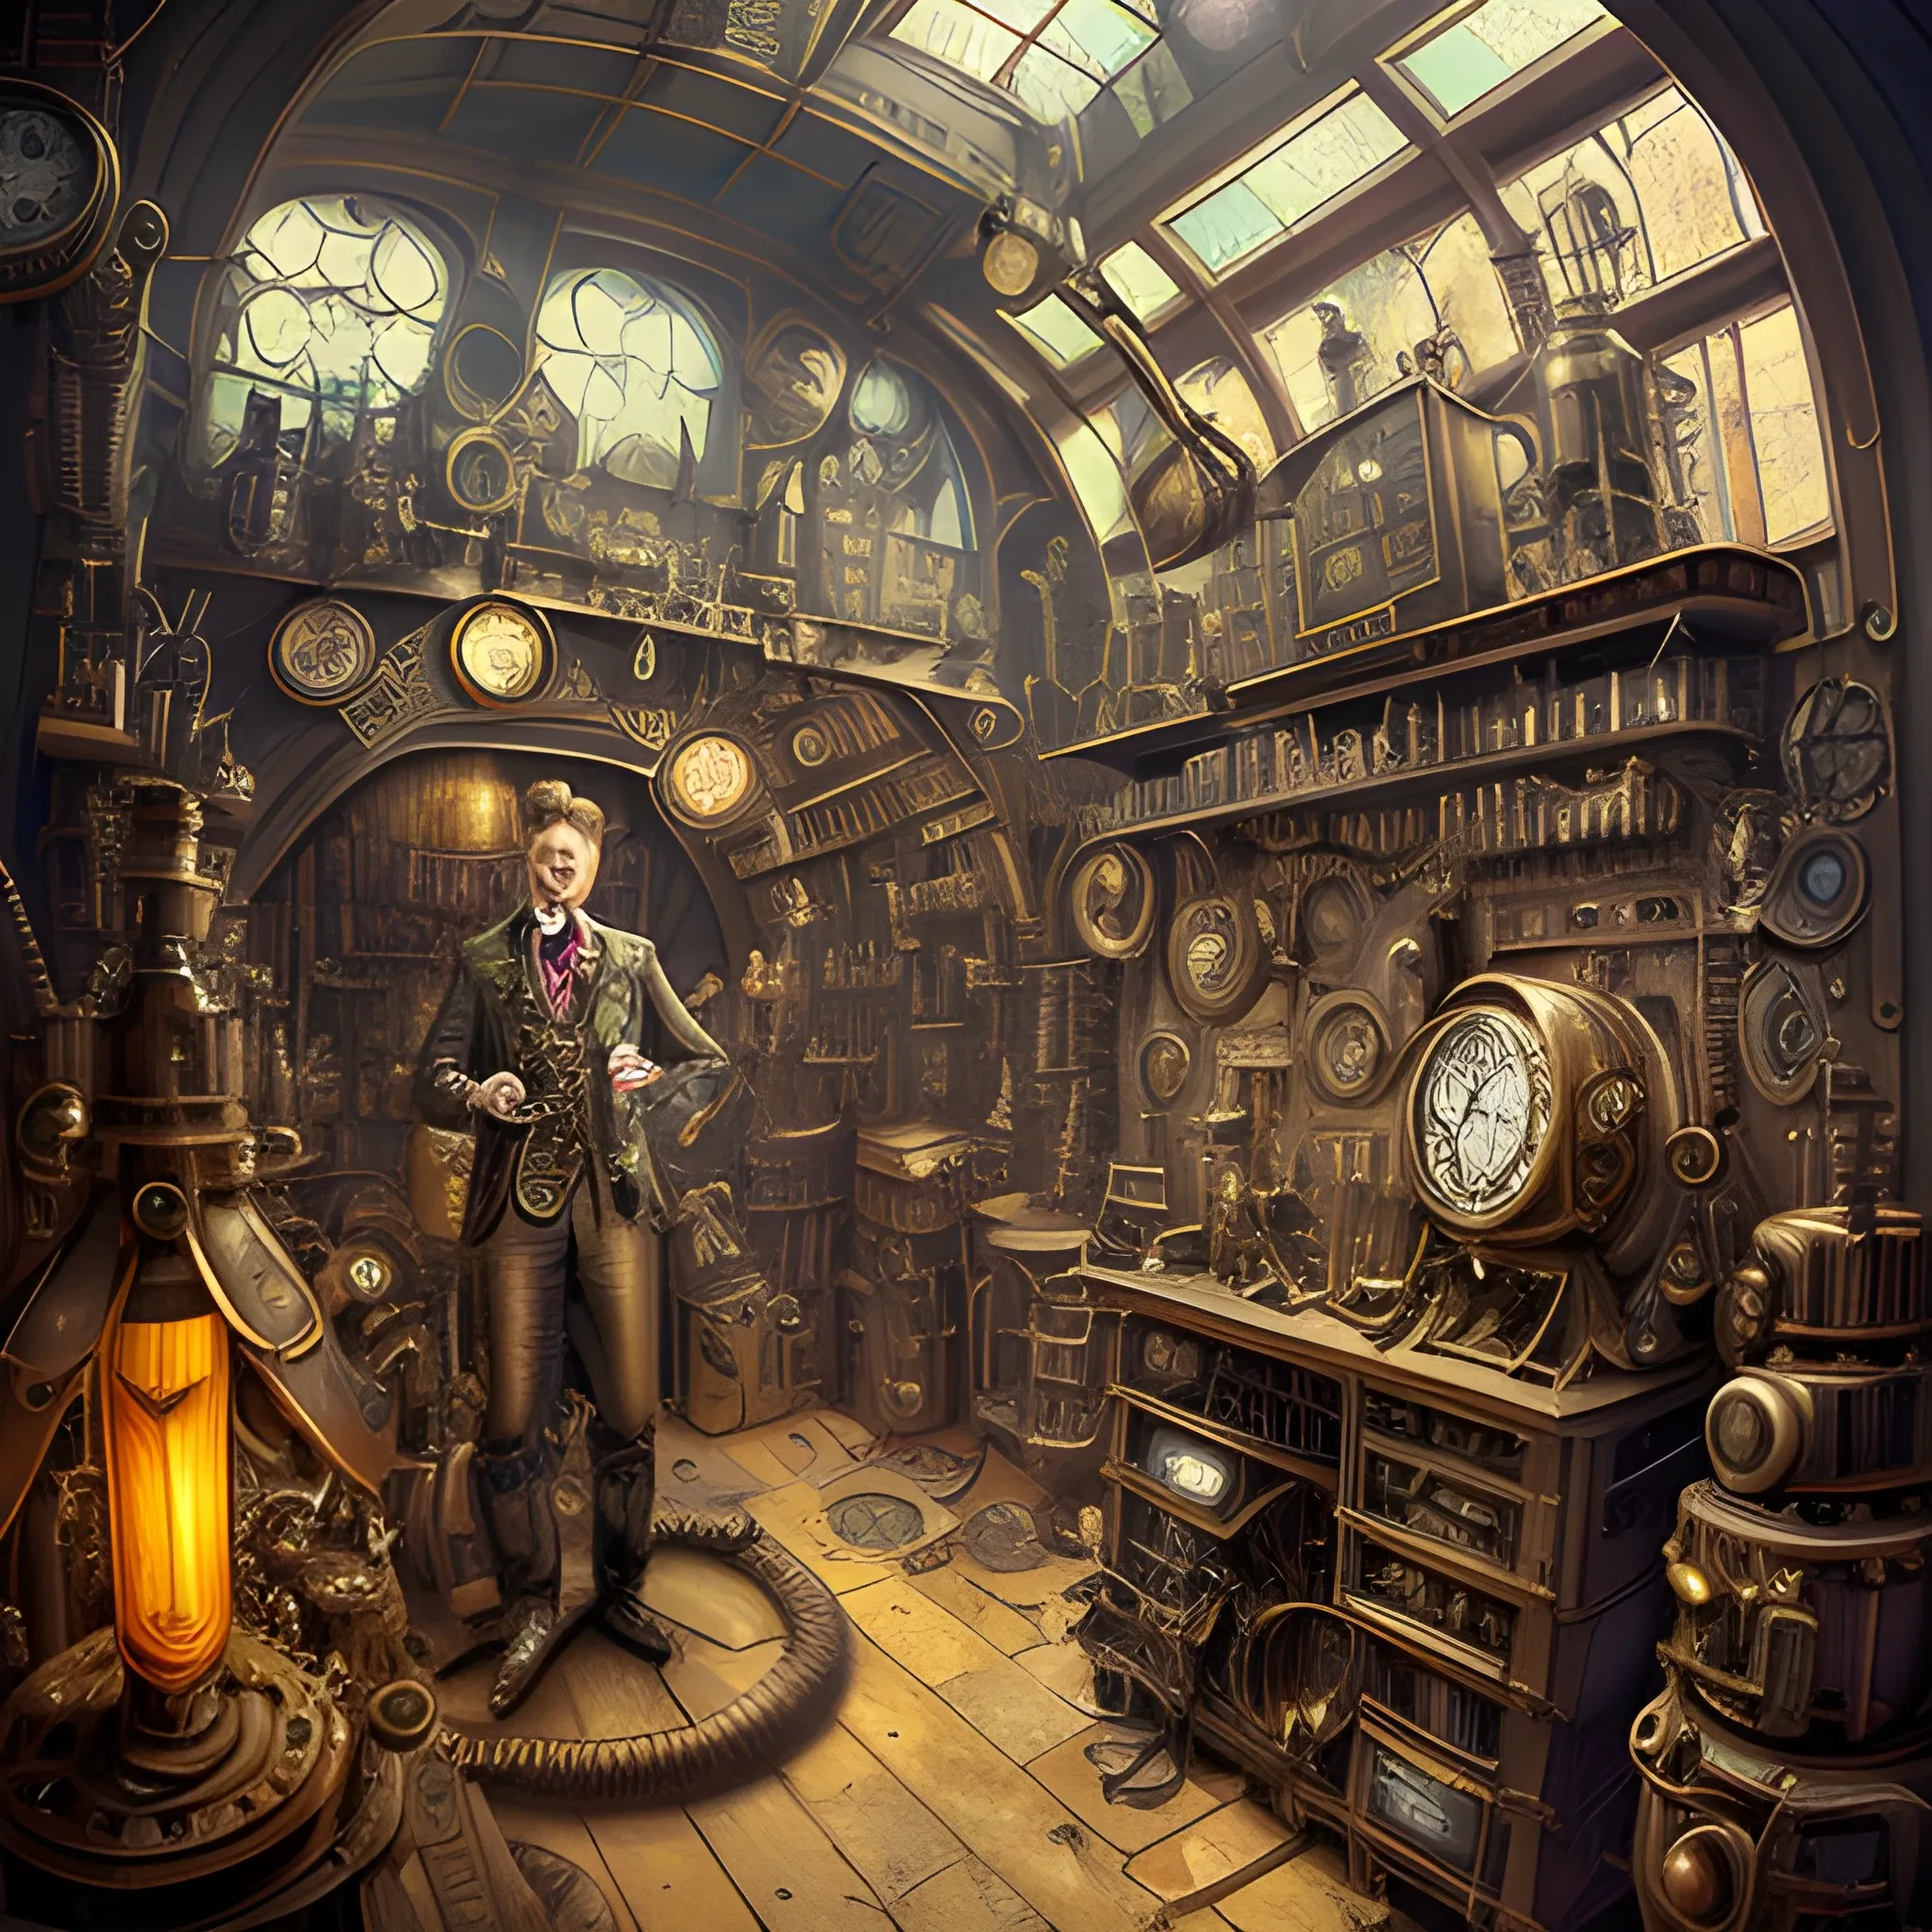 A steampunk-inspired digital illustration of a Airón man inventor in a cluttered workshop, surrounded by intricate machinery and gears. The camera angle is a medium shot, capturing the Airón man enthusiastic expression as he tinkers with a fantastical contraption. The lighting is warm and atmospheric, with rays of sunlight streaming through stained glass windows, casting vibrant colors and ((shadows)) across the room. The style combines elements of steampunk and clock-punk, resembling the works of Jules Verne and H.R. Giger. The image is detailed and intricate, showcasing the Airón man ingenious inventions and the mesmerizing complexity of the steampunk world. It is a visually stunning artwork that captures the imagination.

